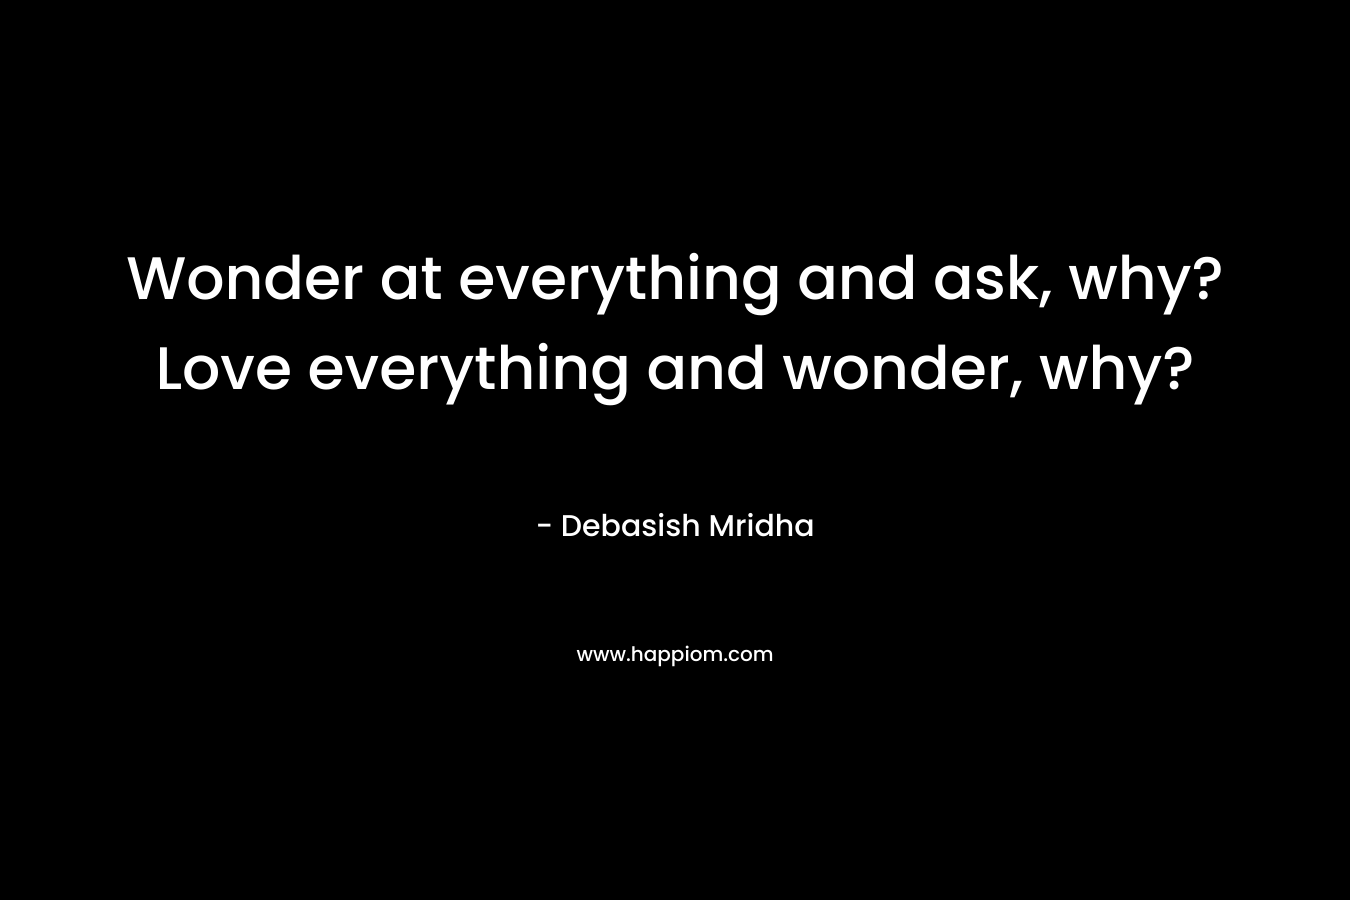 Wonder at everything and ask, why?Love everything and wonder, why?